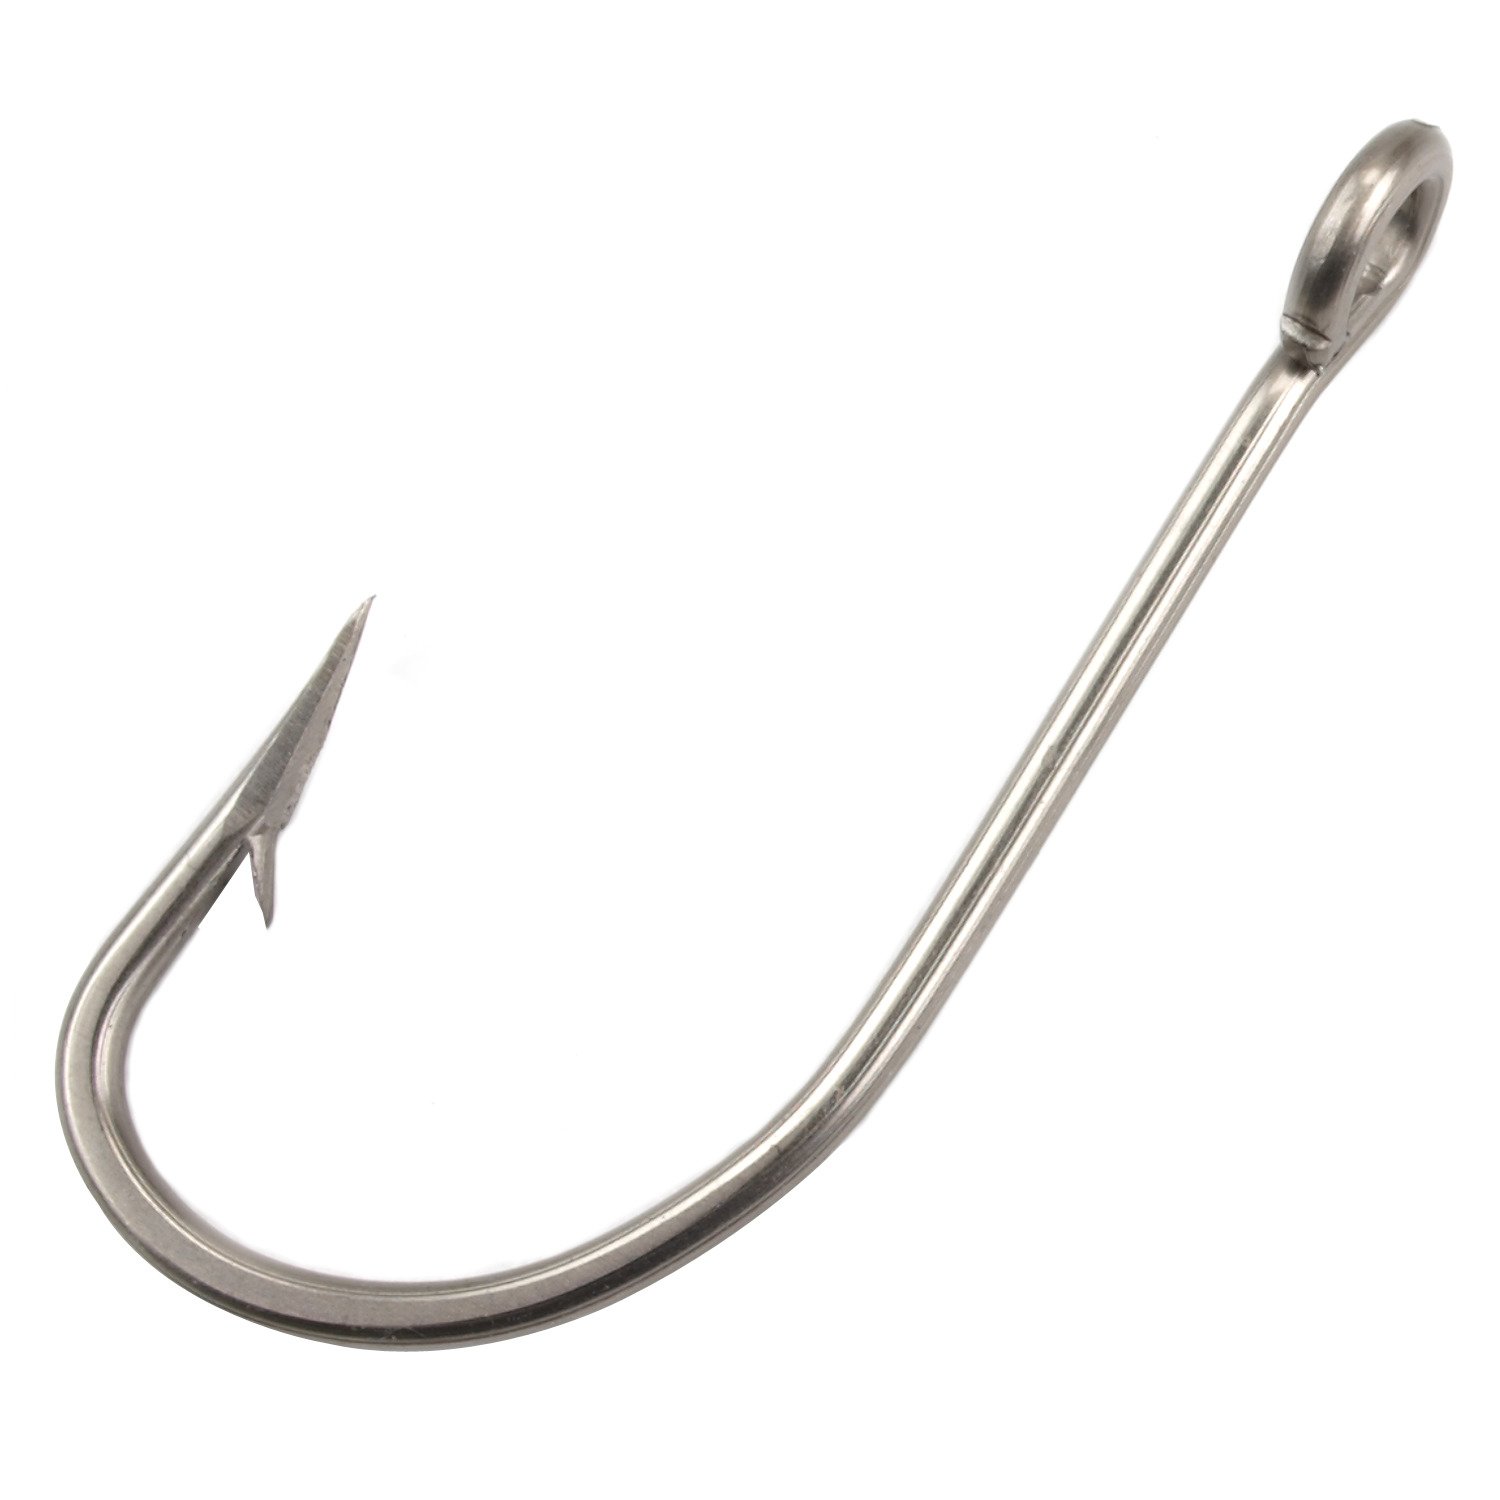 Academy Sports + Outdoors Eagle Claw O'Shaughnessy Trot Line Single Hooks  50-Pack